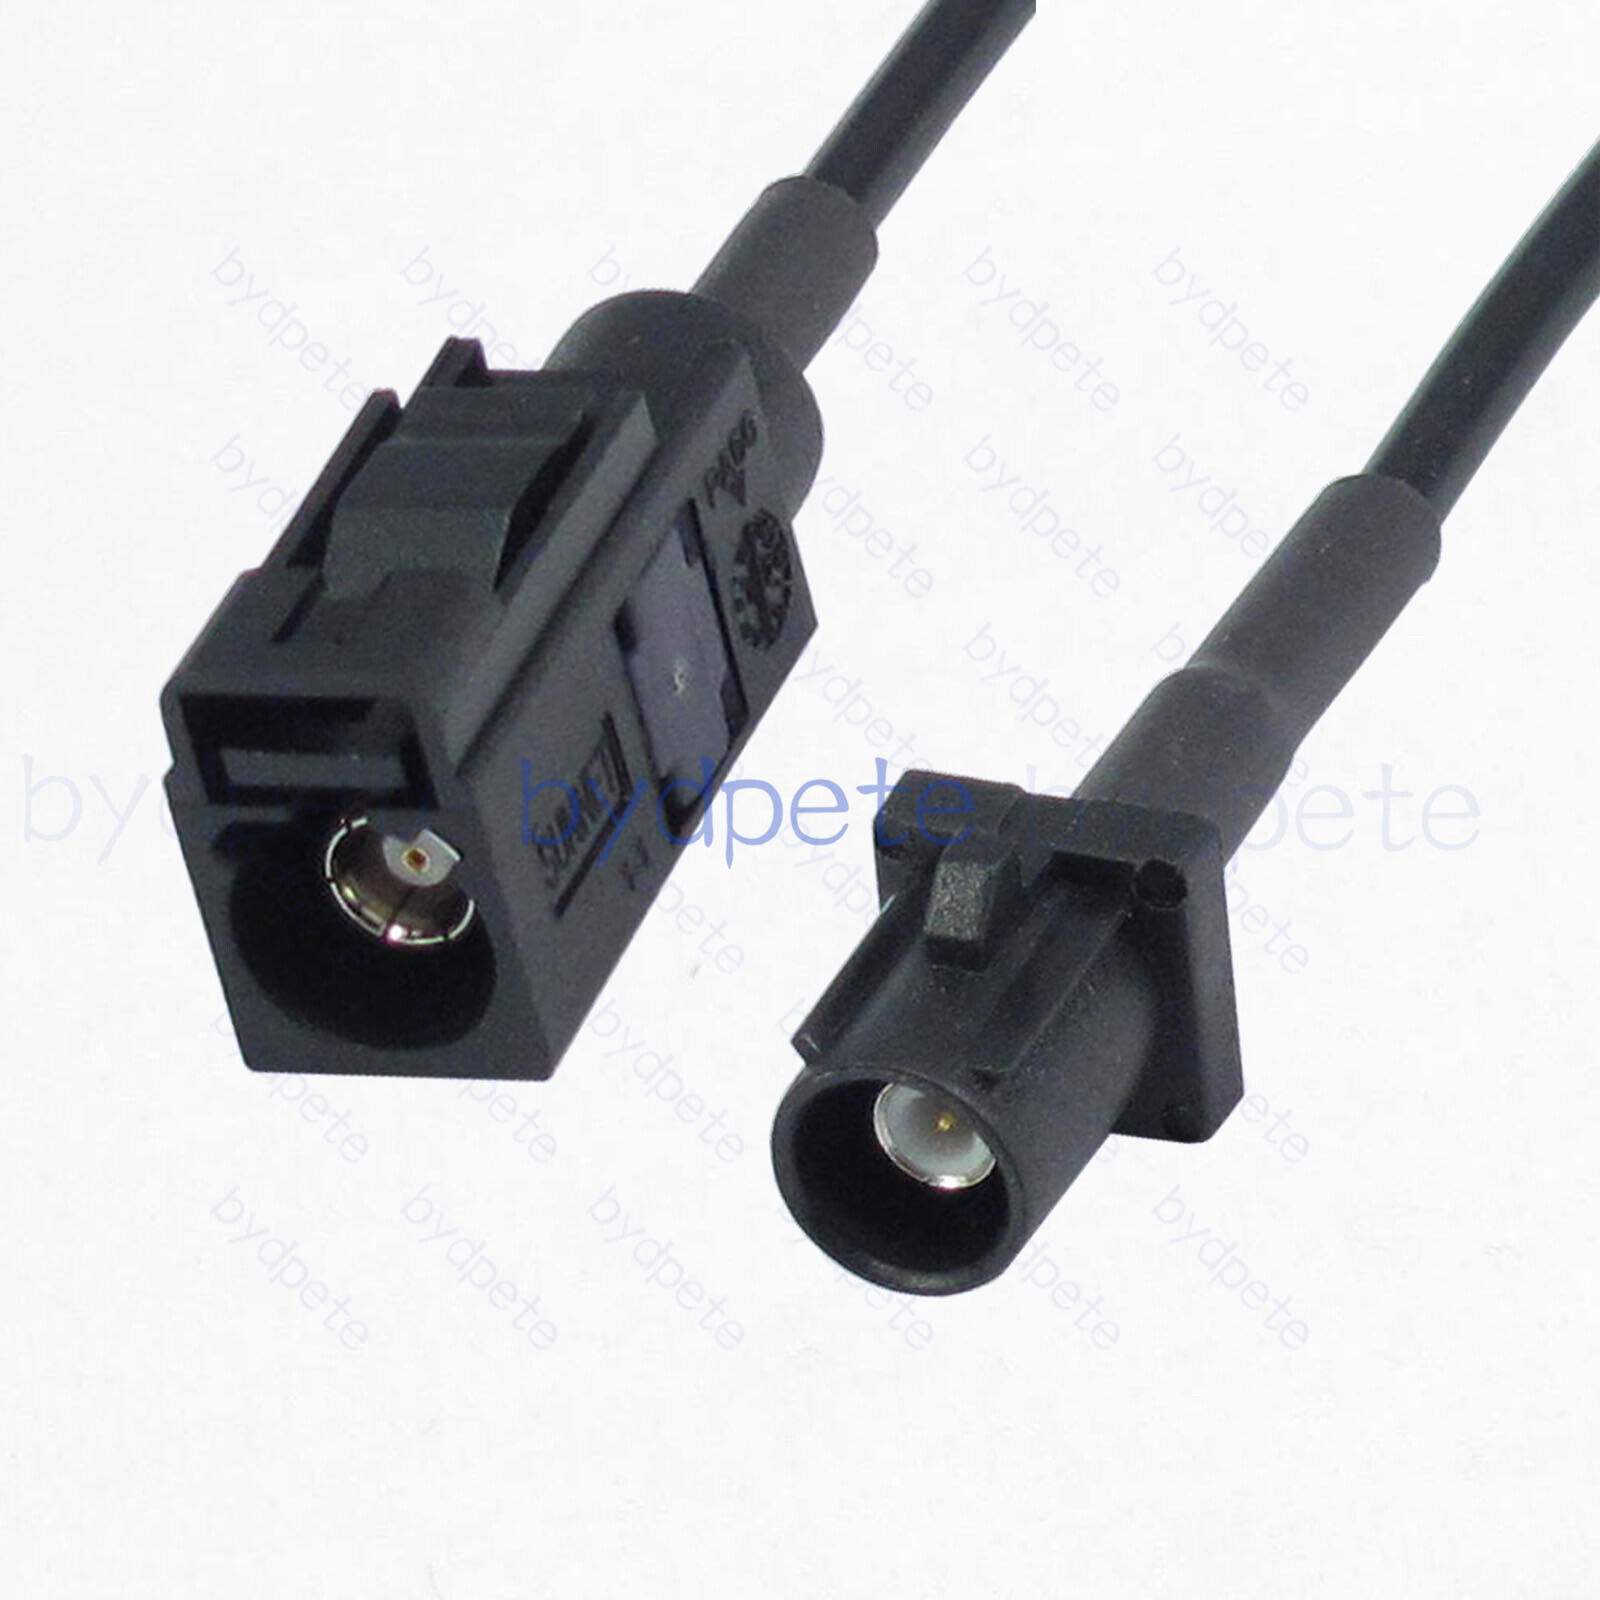 Fakra-A male to female Black 9005 RG174 cable For Car GPS Antenna Wire Wifi coax